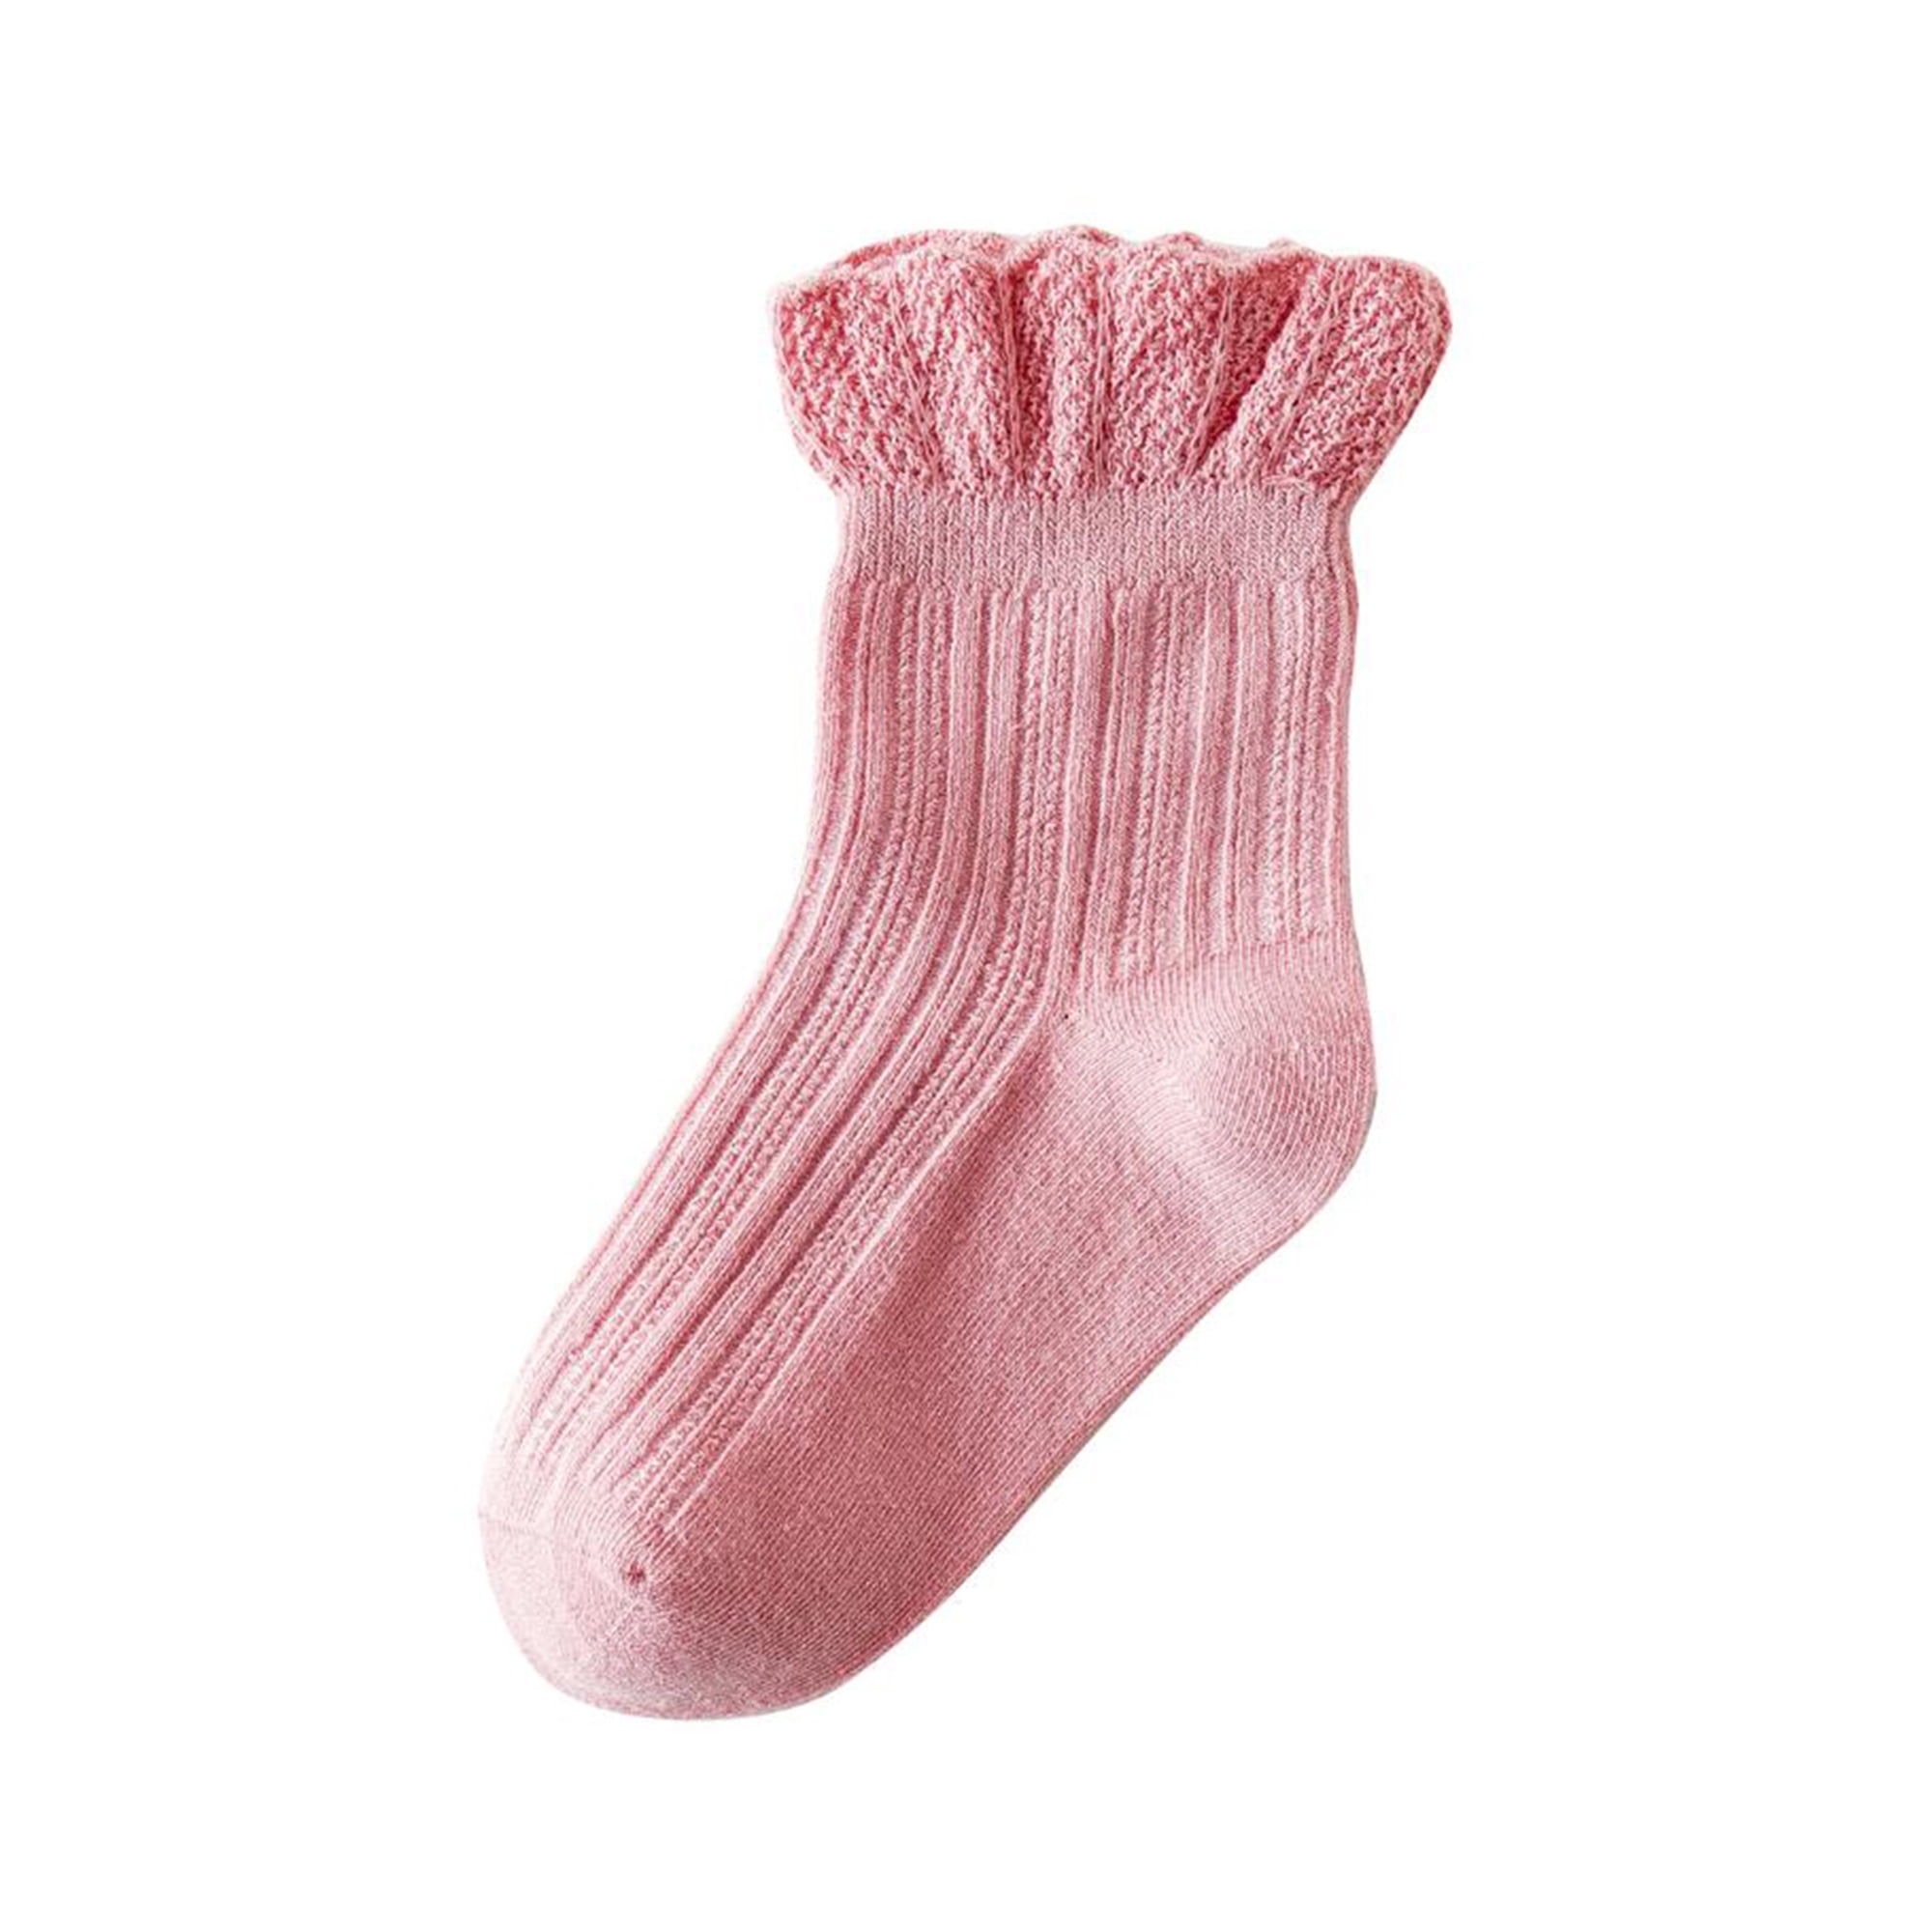 Robeez Pretty Cables Socks, 3 Pack